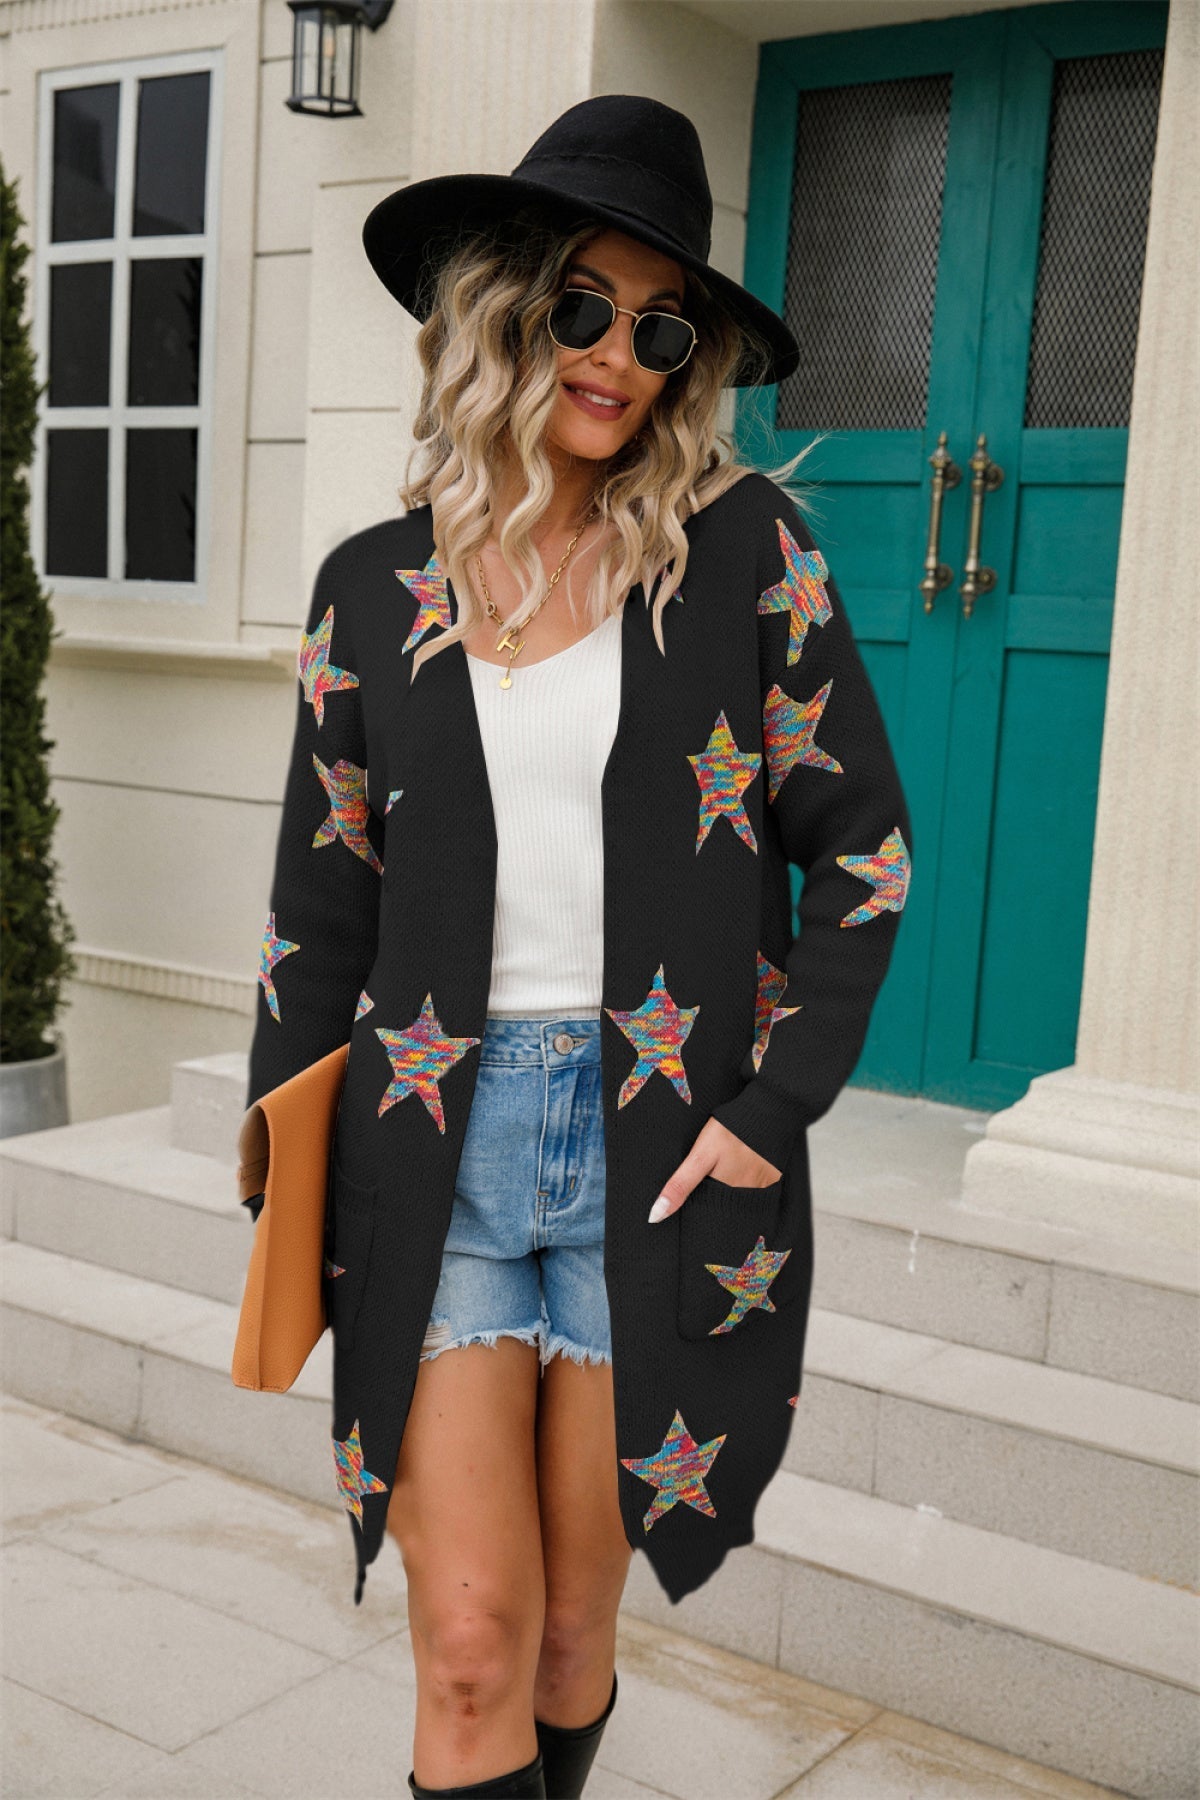 Star Graphics Knit Sweater Cardigan With Pockets